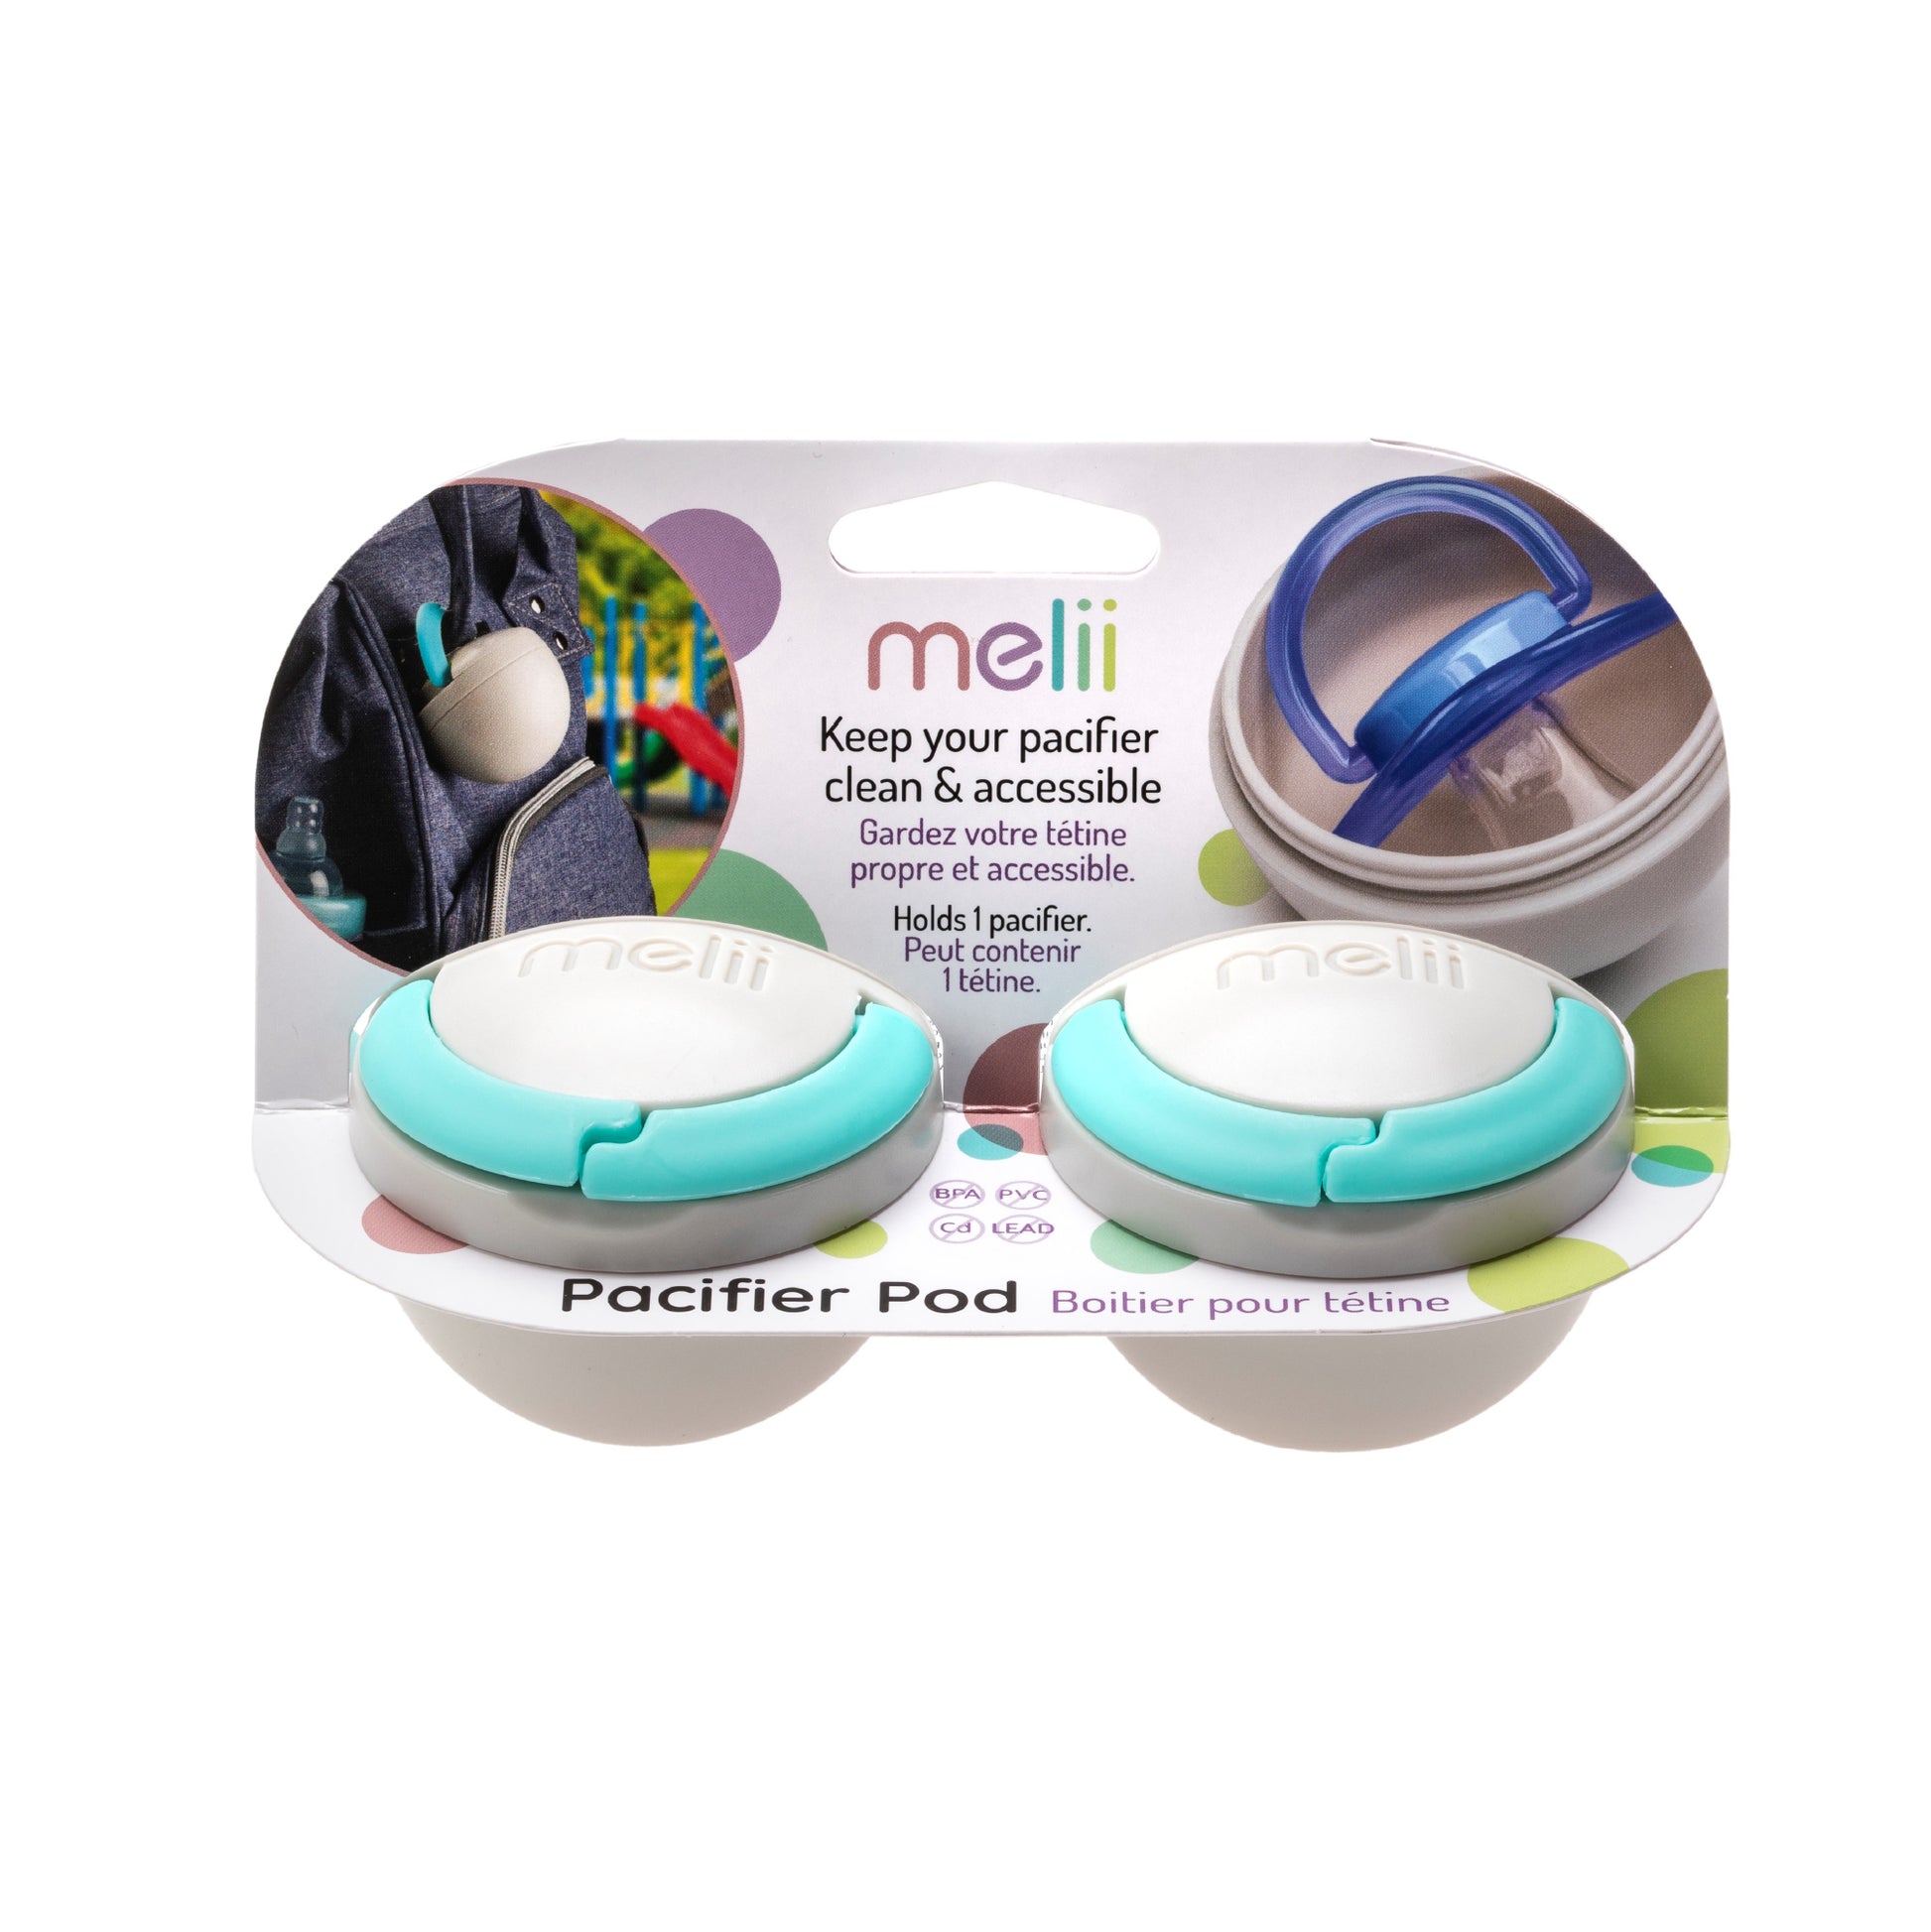 melii Pacifier Pod for On the Go Moms - Hygienic BPA Free Holder with Convenient Attachment, Ideal for Bags and Strollers, Easy Cleaning and Quick Access